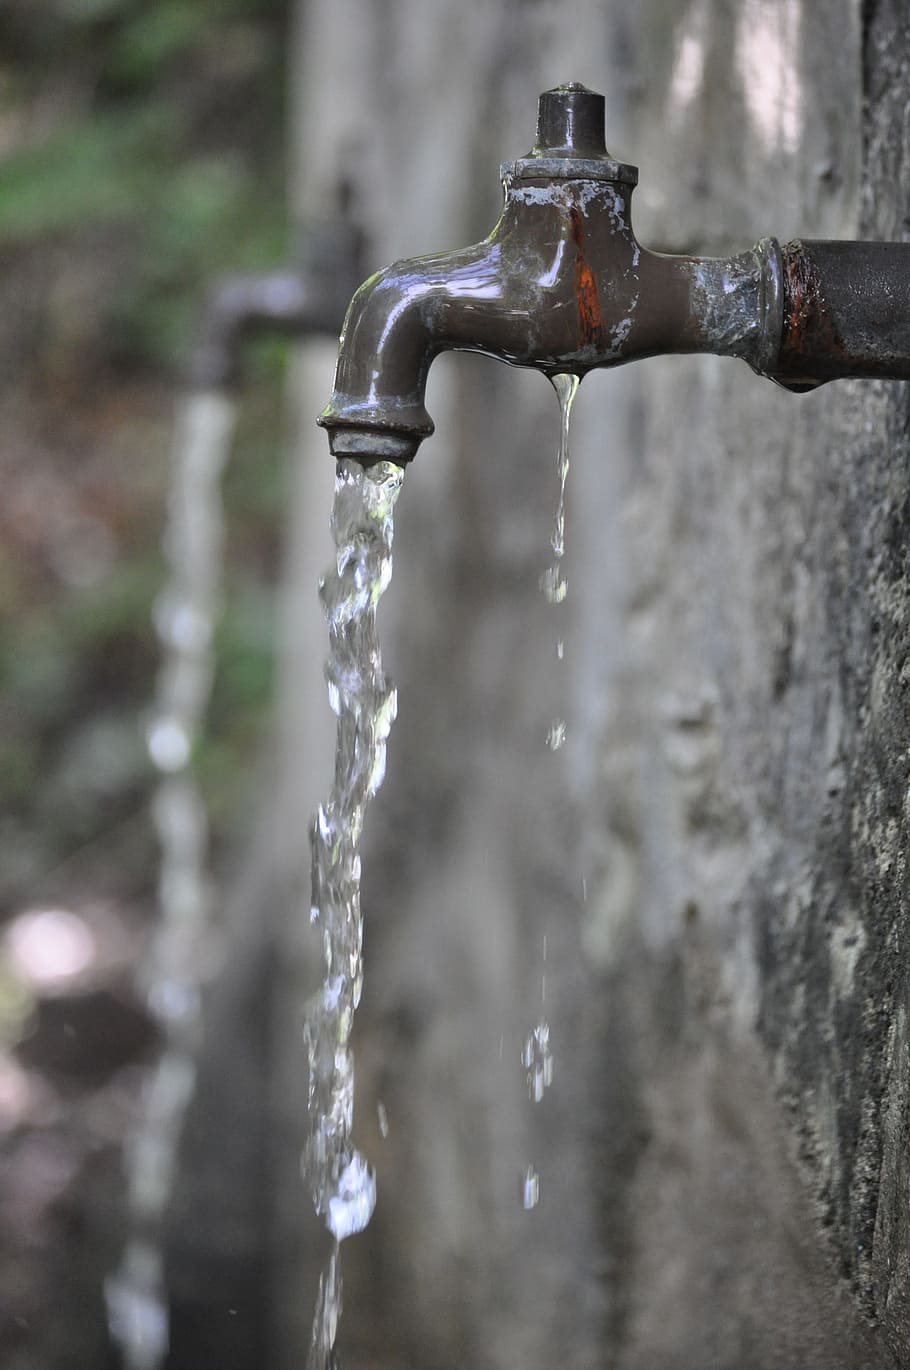 water, fontana, italy, gush, fontanella, aqueducts, beverage, nature, faucet, focus on foreground